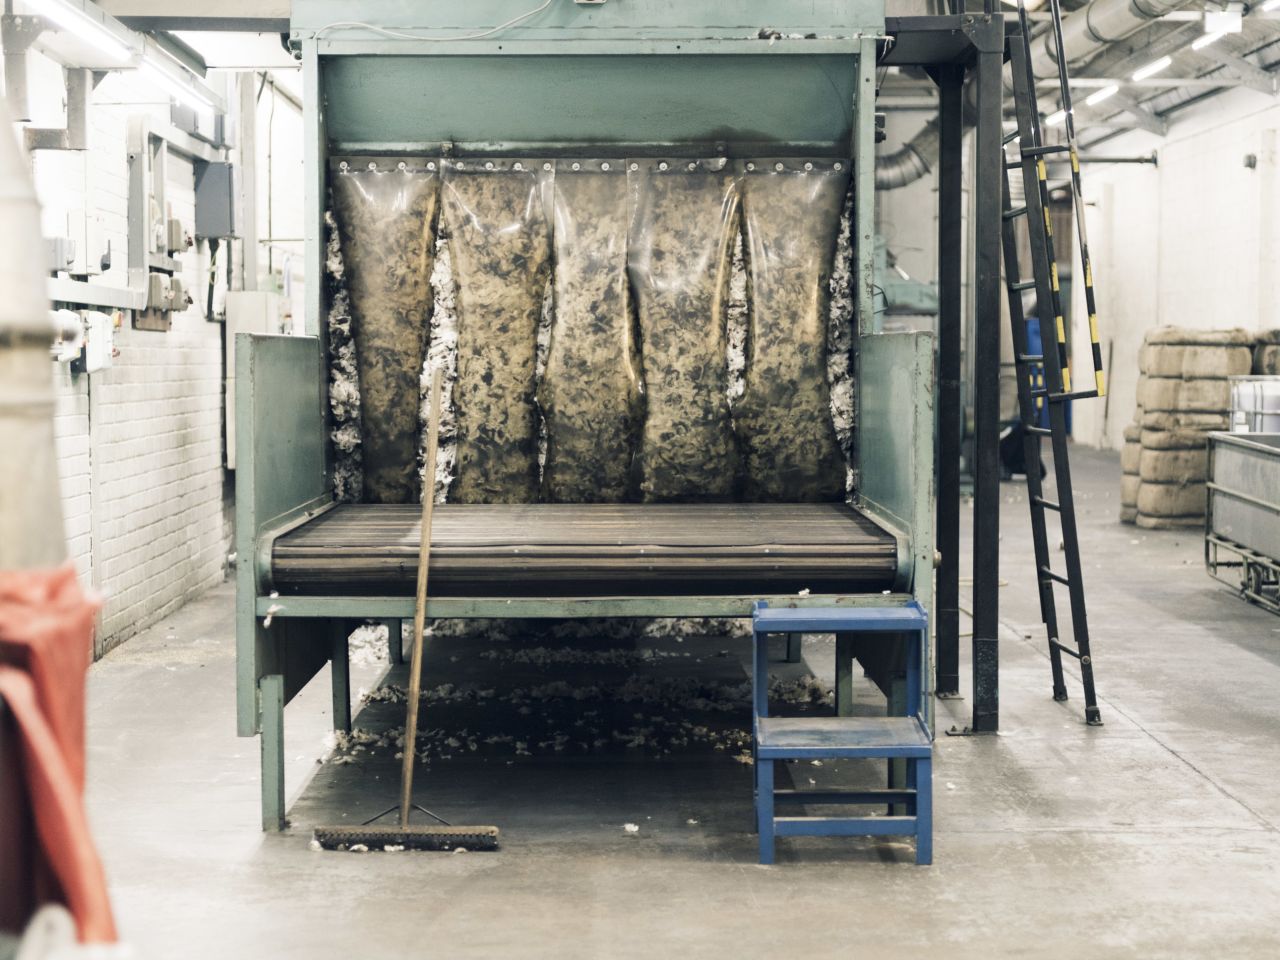 It's then sent to factories to perform a scouring and de-hairing process and further remove any coarse residue hair. The fiber is then spun and twisted into fine yarn, ready to be made into clothing such as coats, sweaters, scarves or socks.<br />